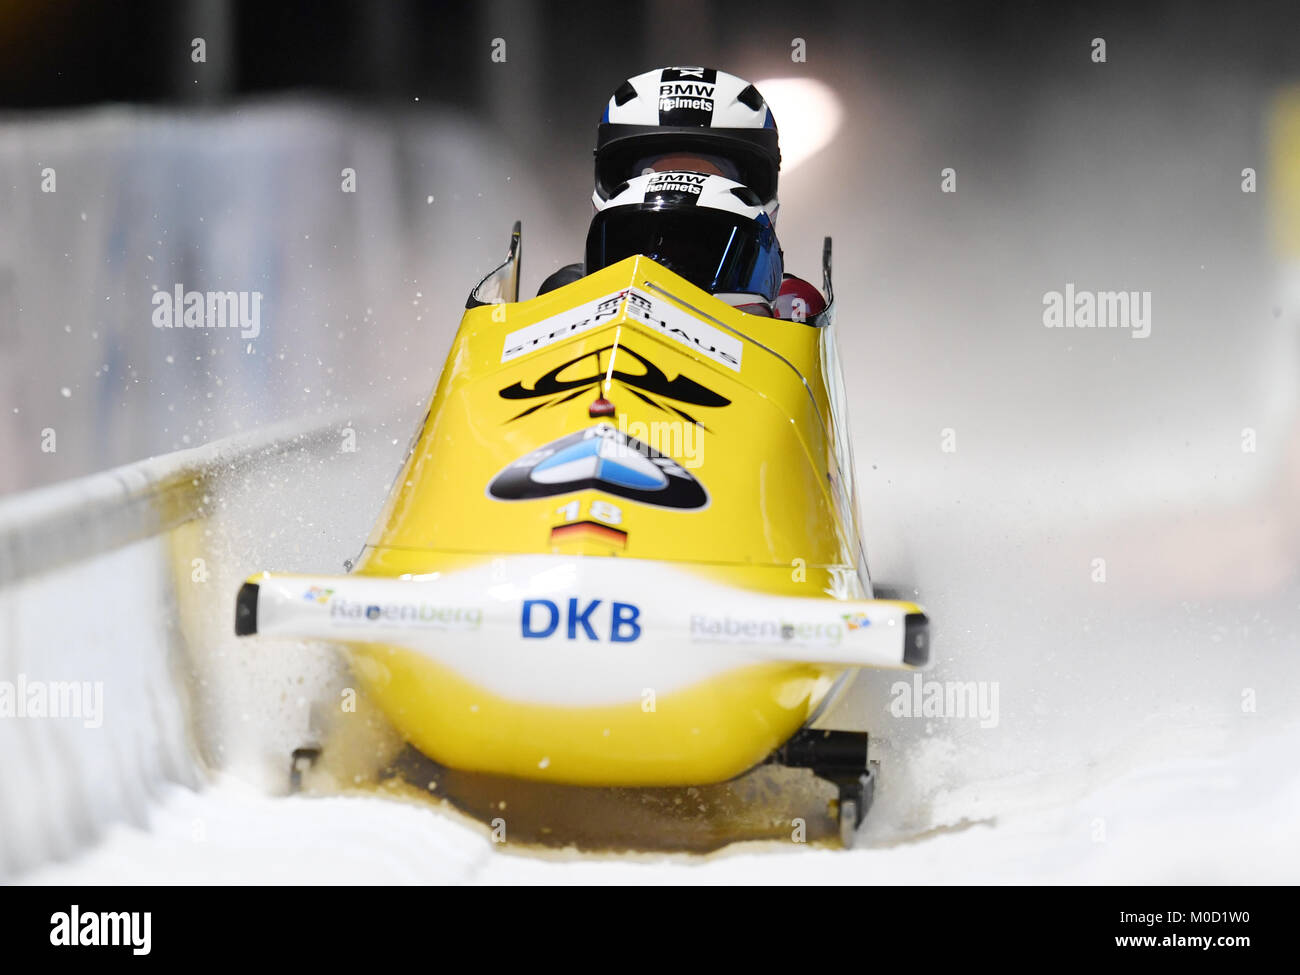 Schoenau am Koenigssee, Germany. 20th Jan, 2018. Stephanie Schneider and Annika Drazek of Germany cross the finish line as victors during the 2-woman event at the Bobsleigh World Cup in Schoenau am Koenigssee, Germany, 20 January 2018. Credit: Tobias Hase/dpa/Alamy Live News Stock Photo